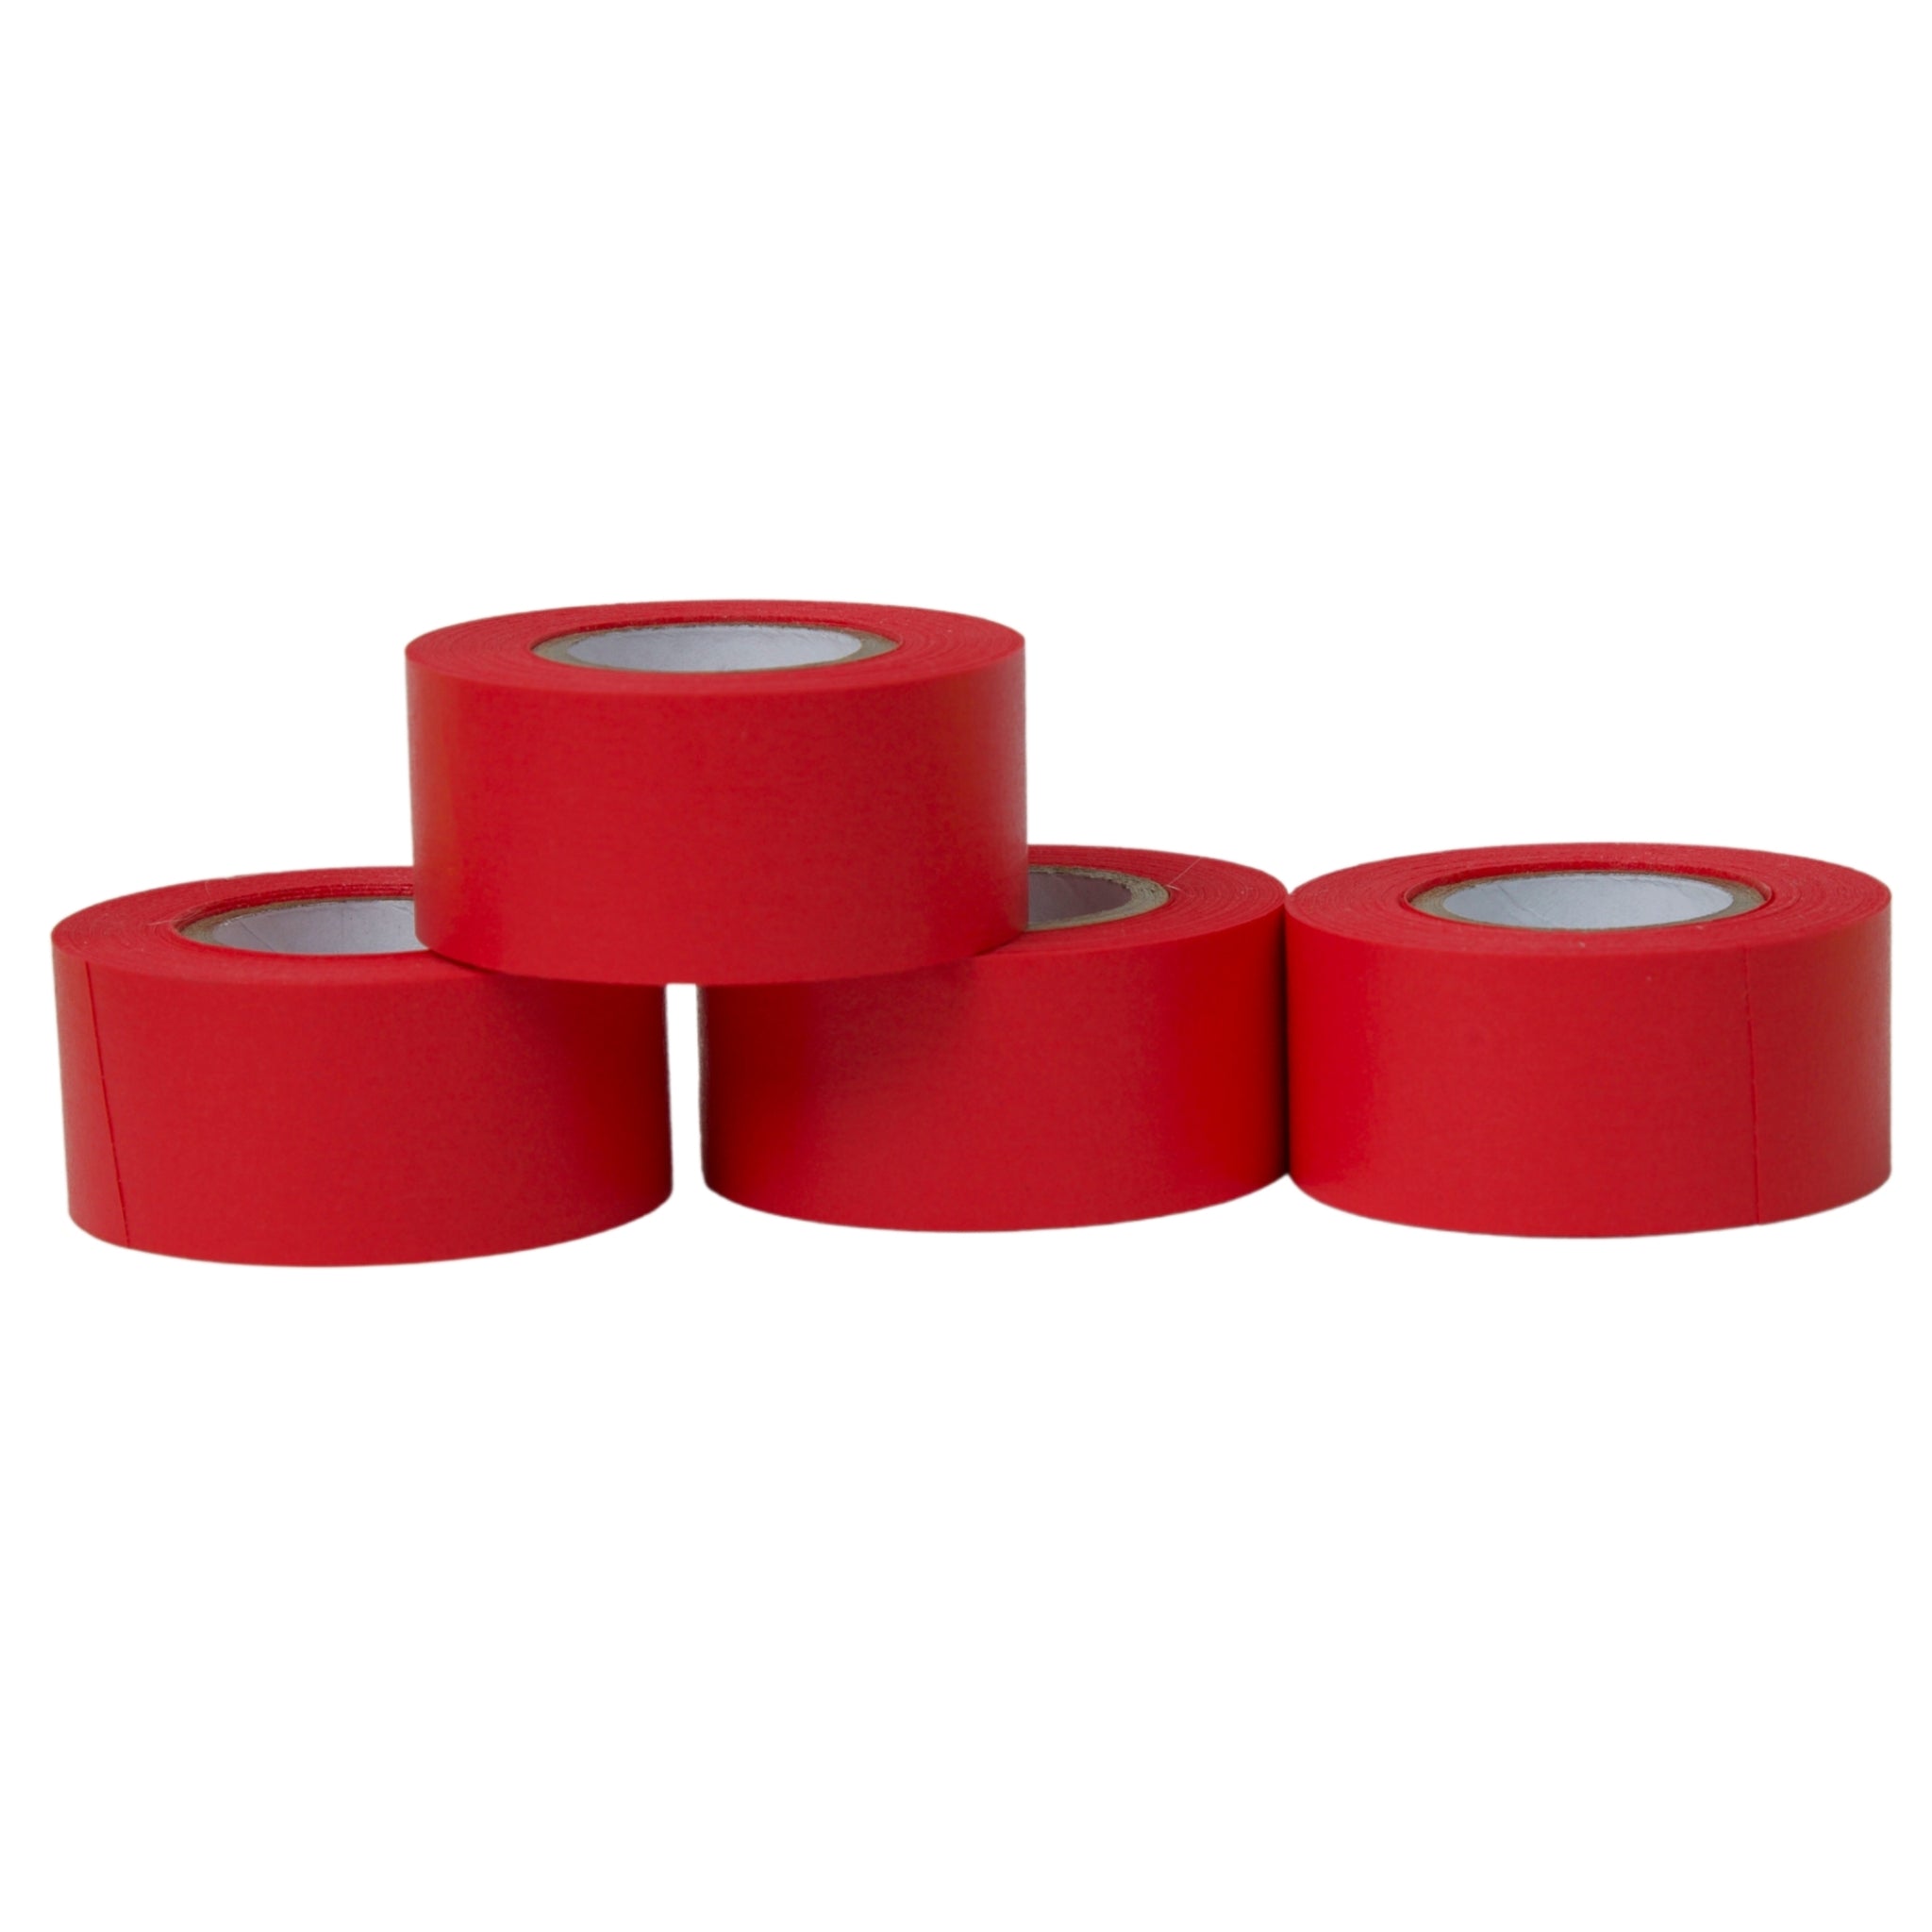 1" x 360" Artist Tape - 4 Pack Red